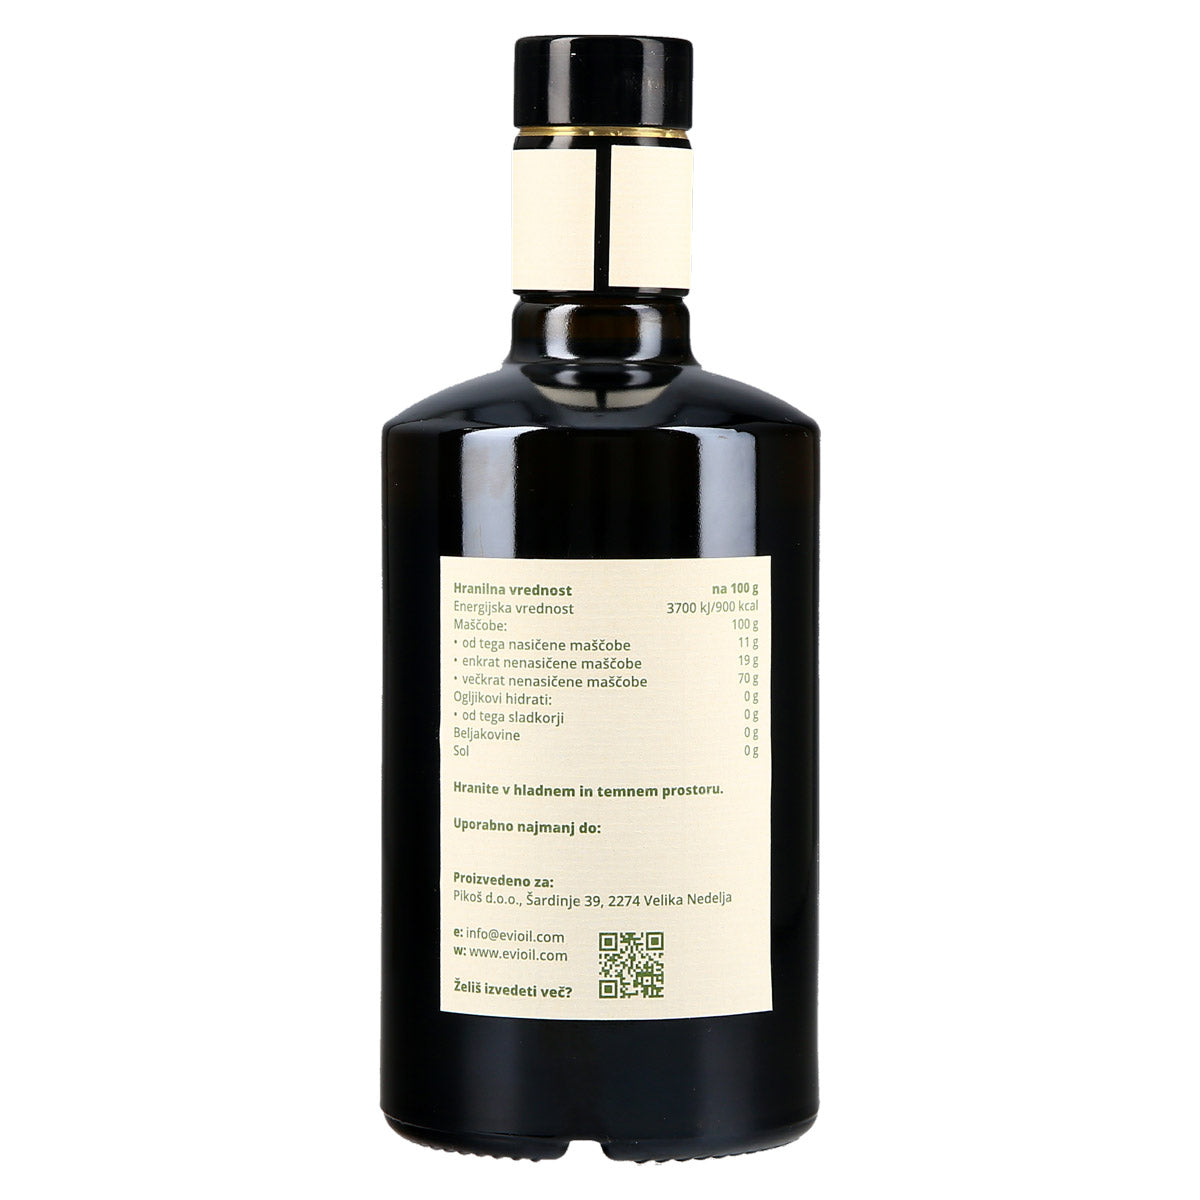 grapeseeds oil 500 ml Evioil with nutrition and contact data 